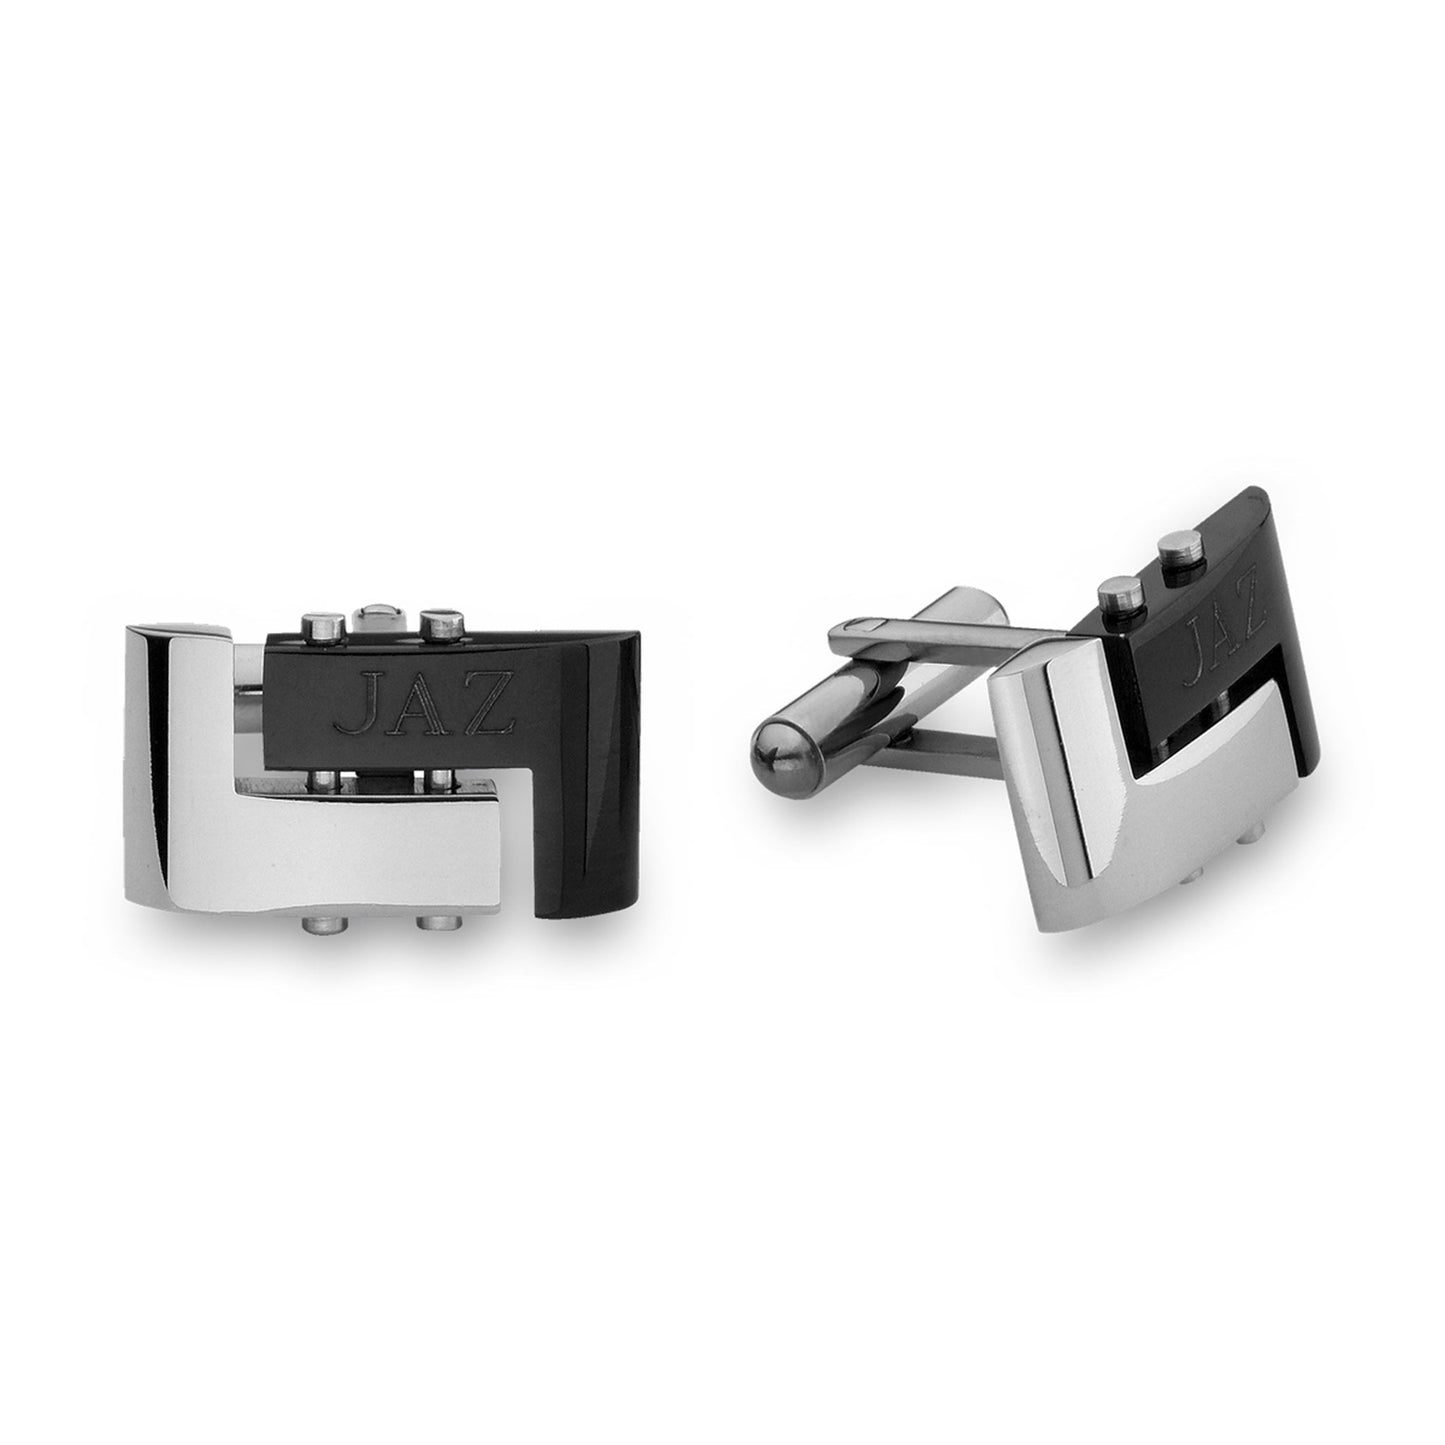 A geometric black & silver stainless steel cufflinks displayed on a neutral white background.